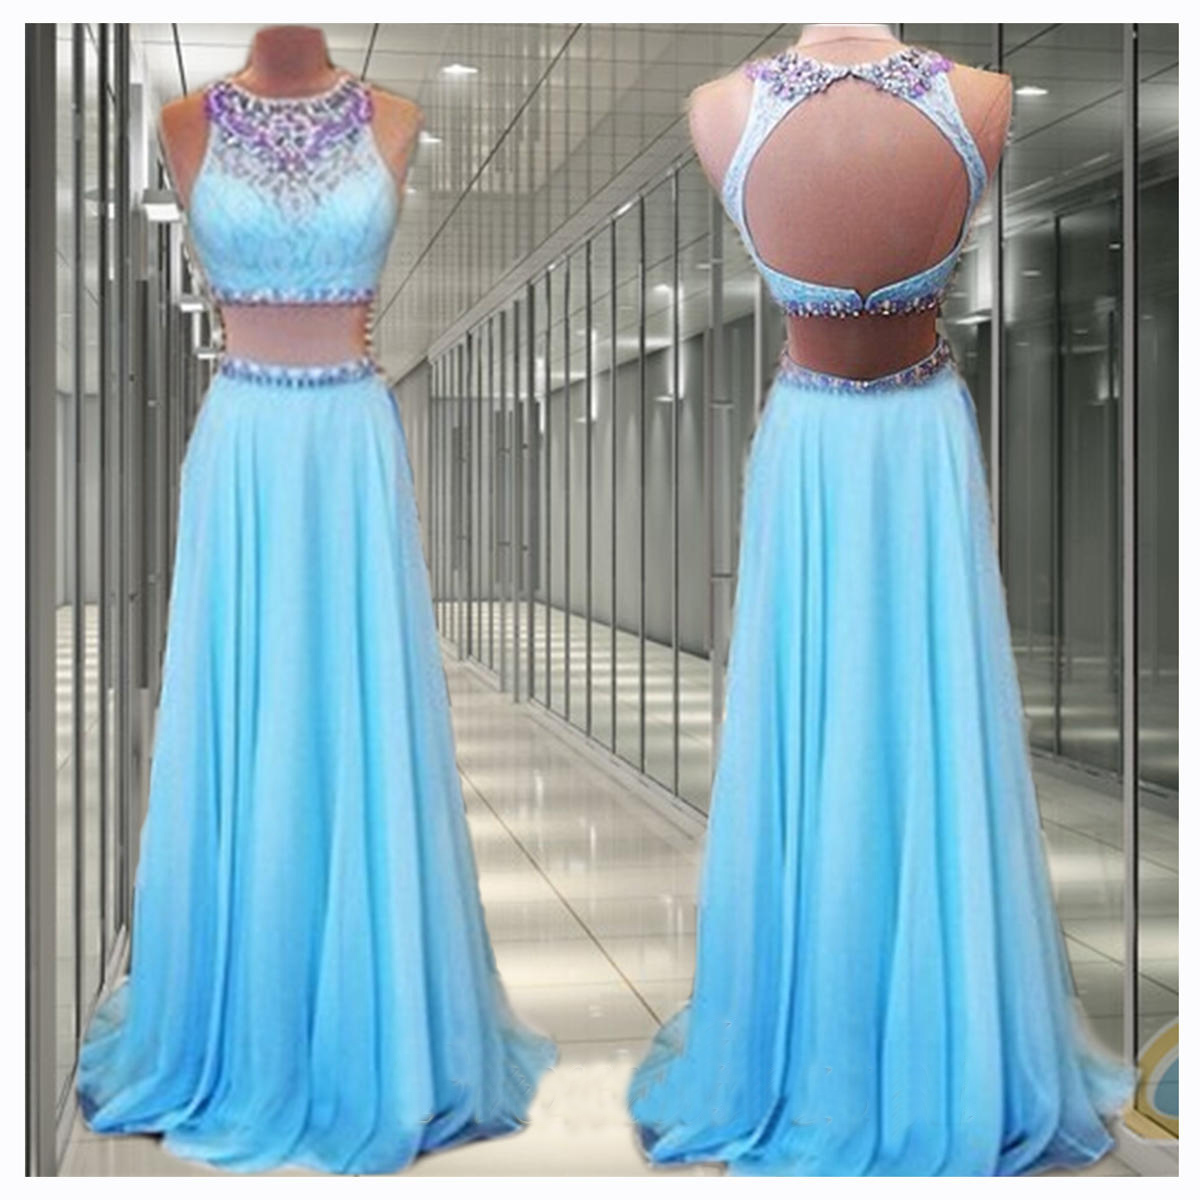 2 Pieces Prom Dresses Blue Prom Dress Long Prom Dresses Prom Dresses 2016 Prom Dresses Custom Prom Dresses Dresses For Prom